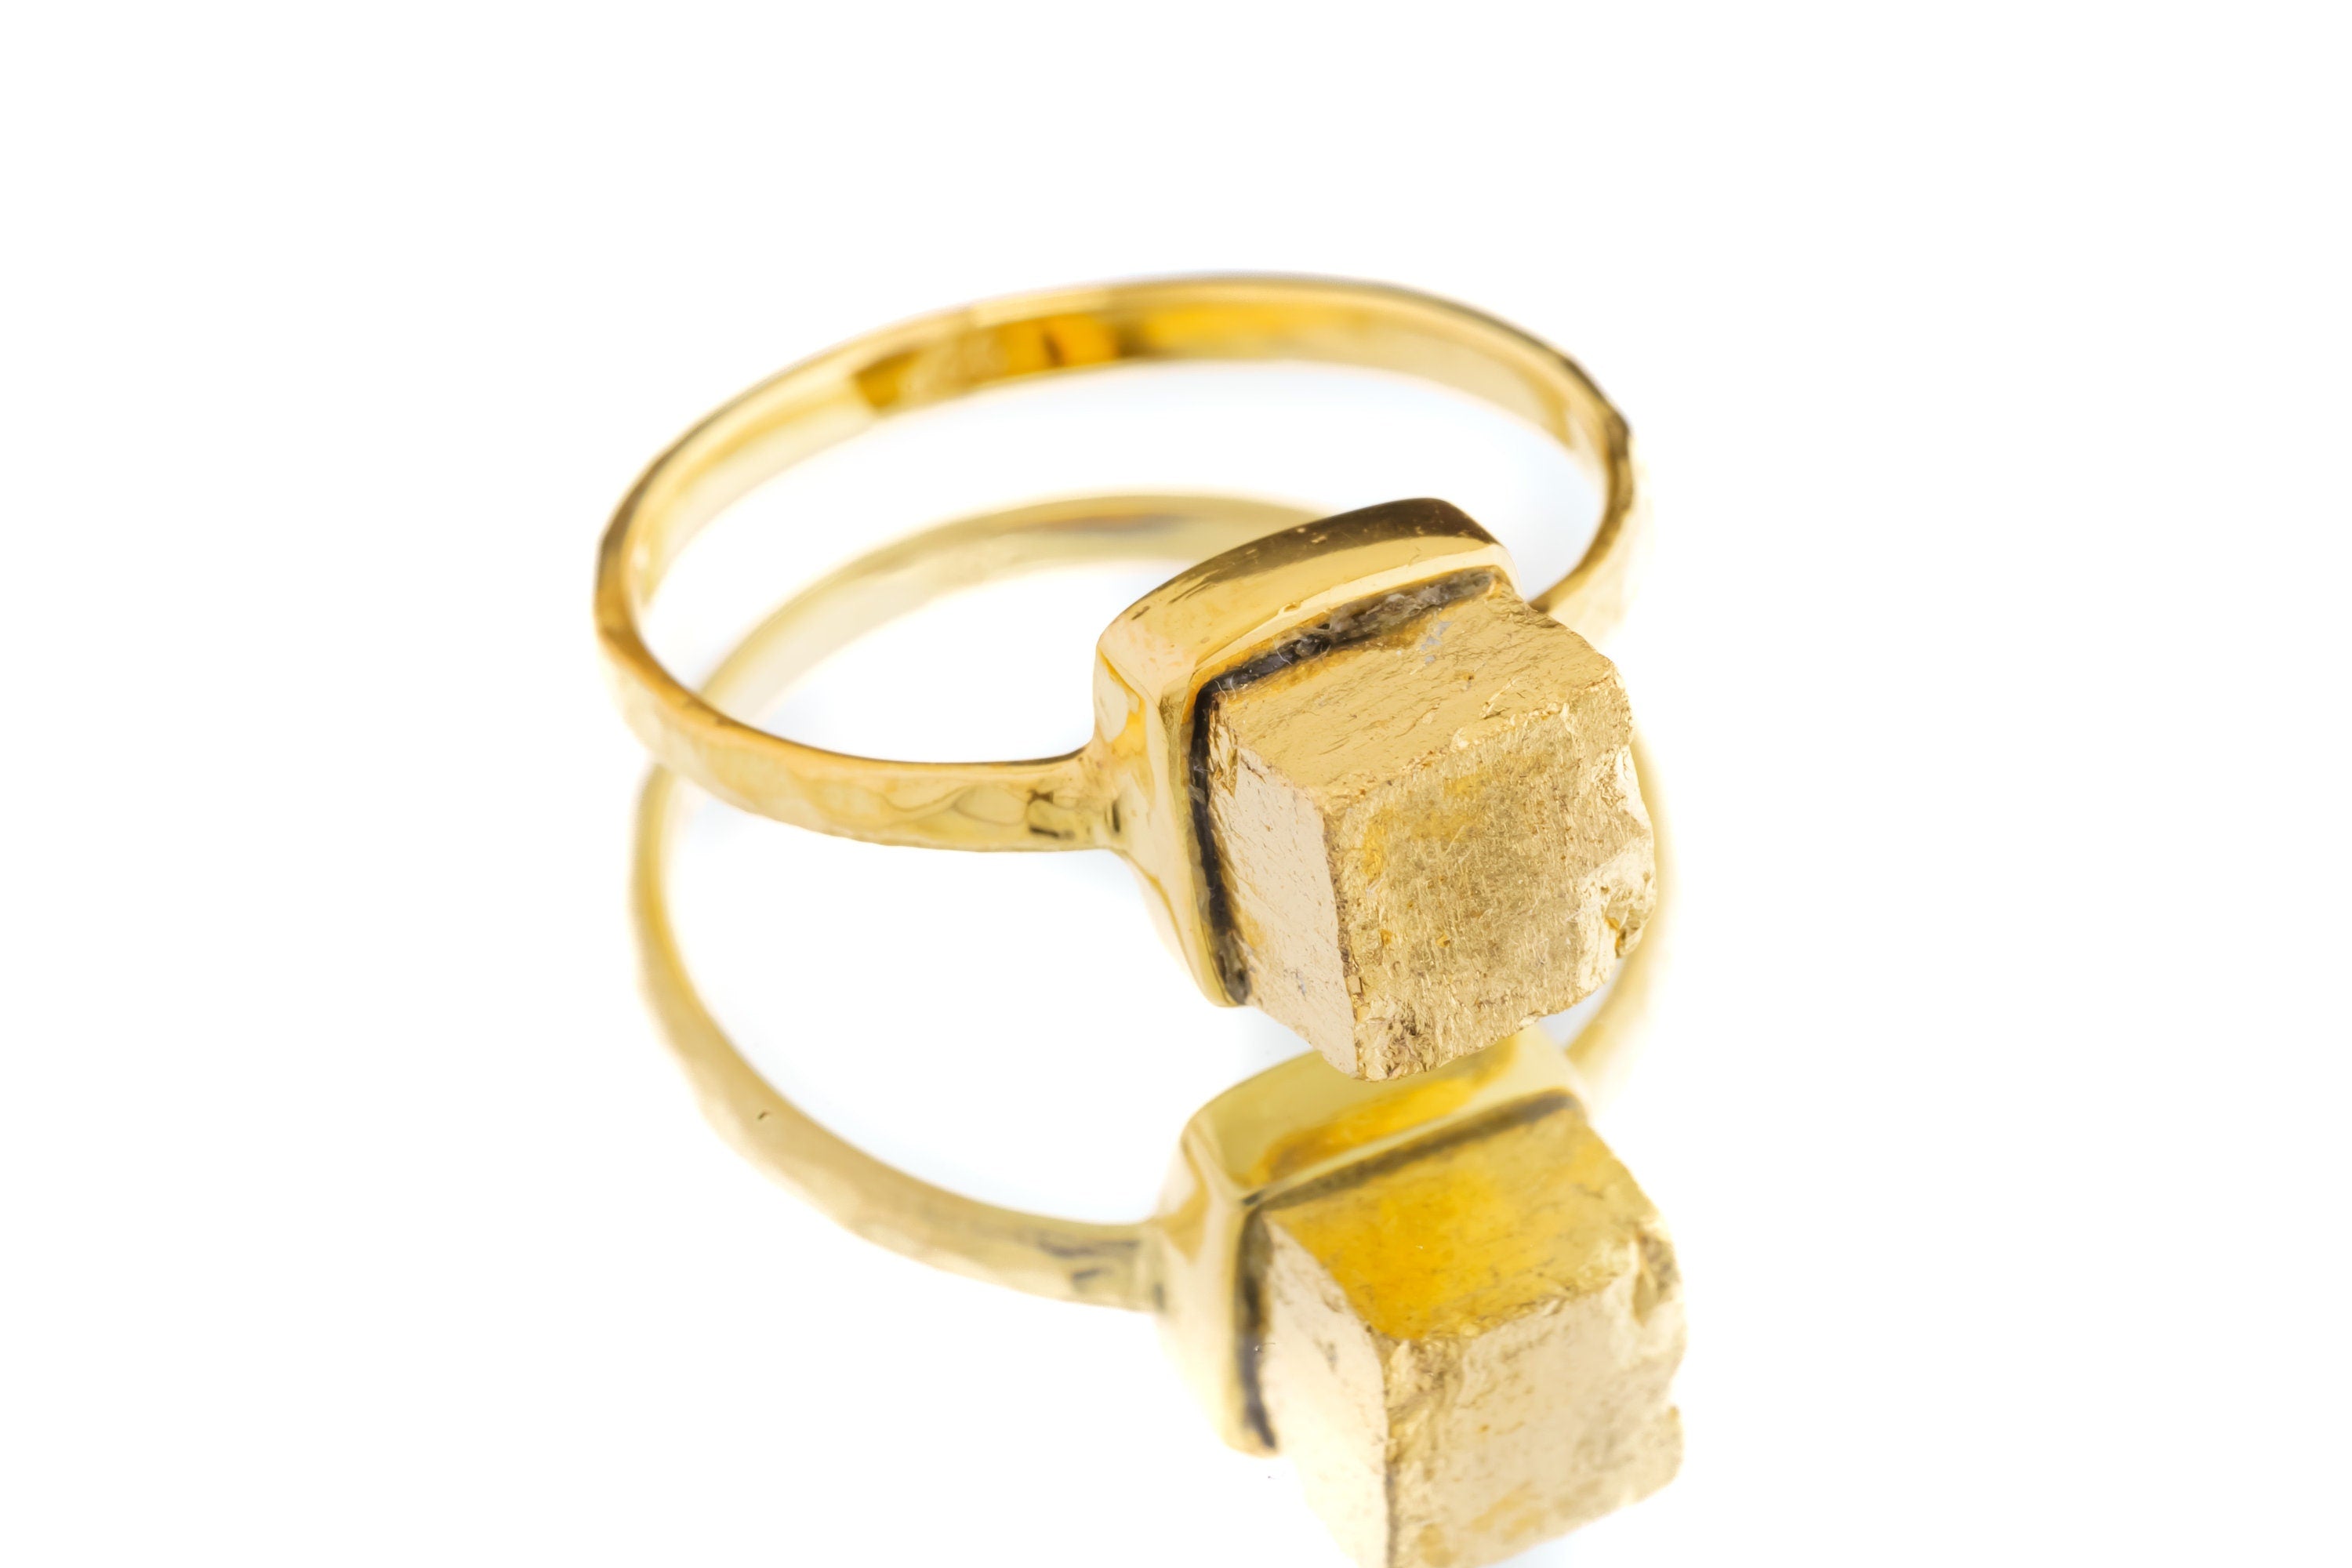 Gold Coated Australian Cubic Pyrite - Stack Crystal Ring - Size 6 1/2 US - Gold Plated 925 Sterling Silver - Thin Band Hammer Textured